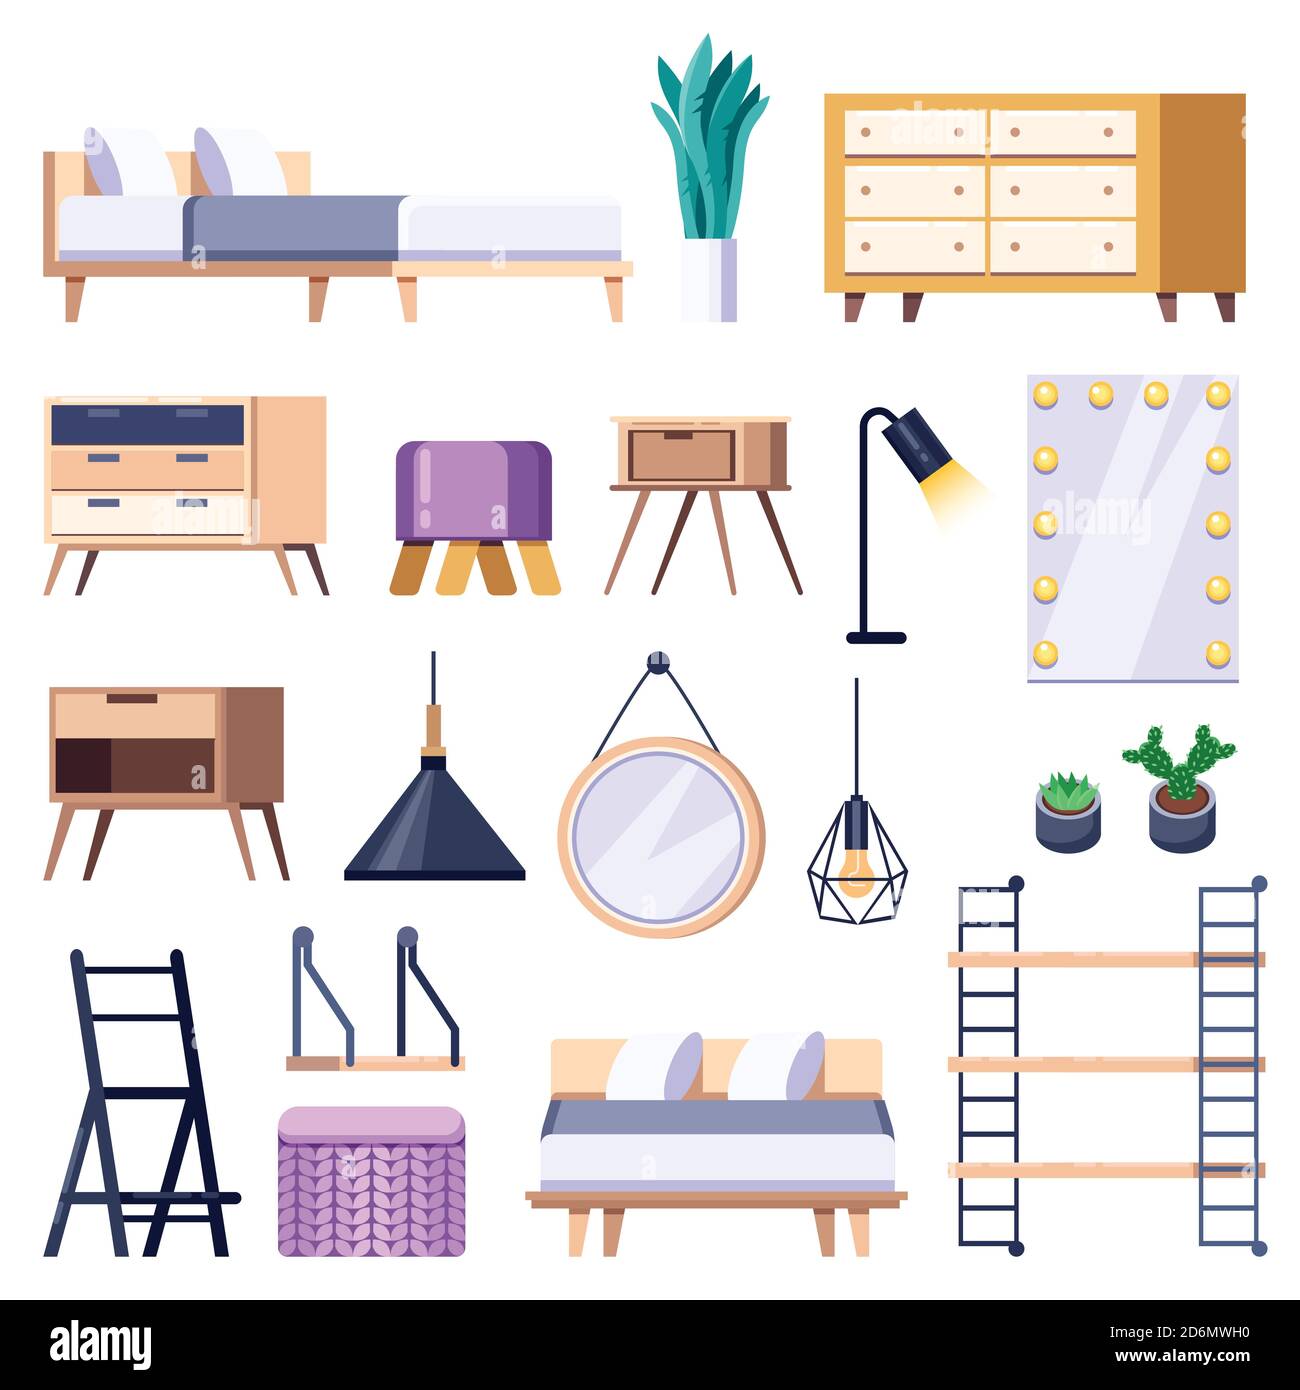 Bedroom modern interior isolated icons and design elements. Vector flat illustration. Cozy scandinavian loft apartment and home furniture. Stock Vector